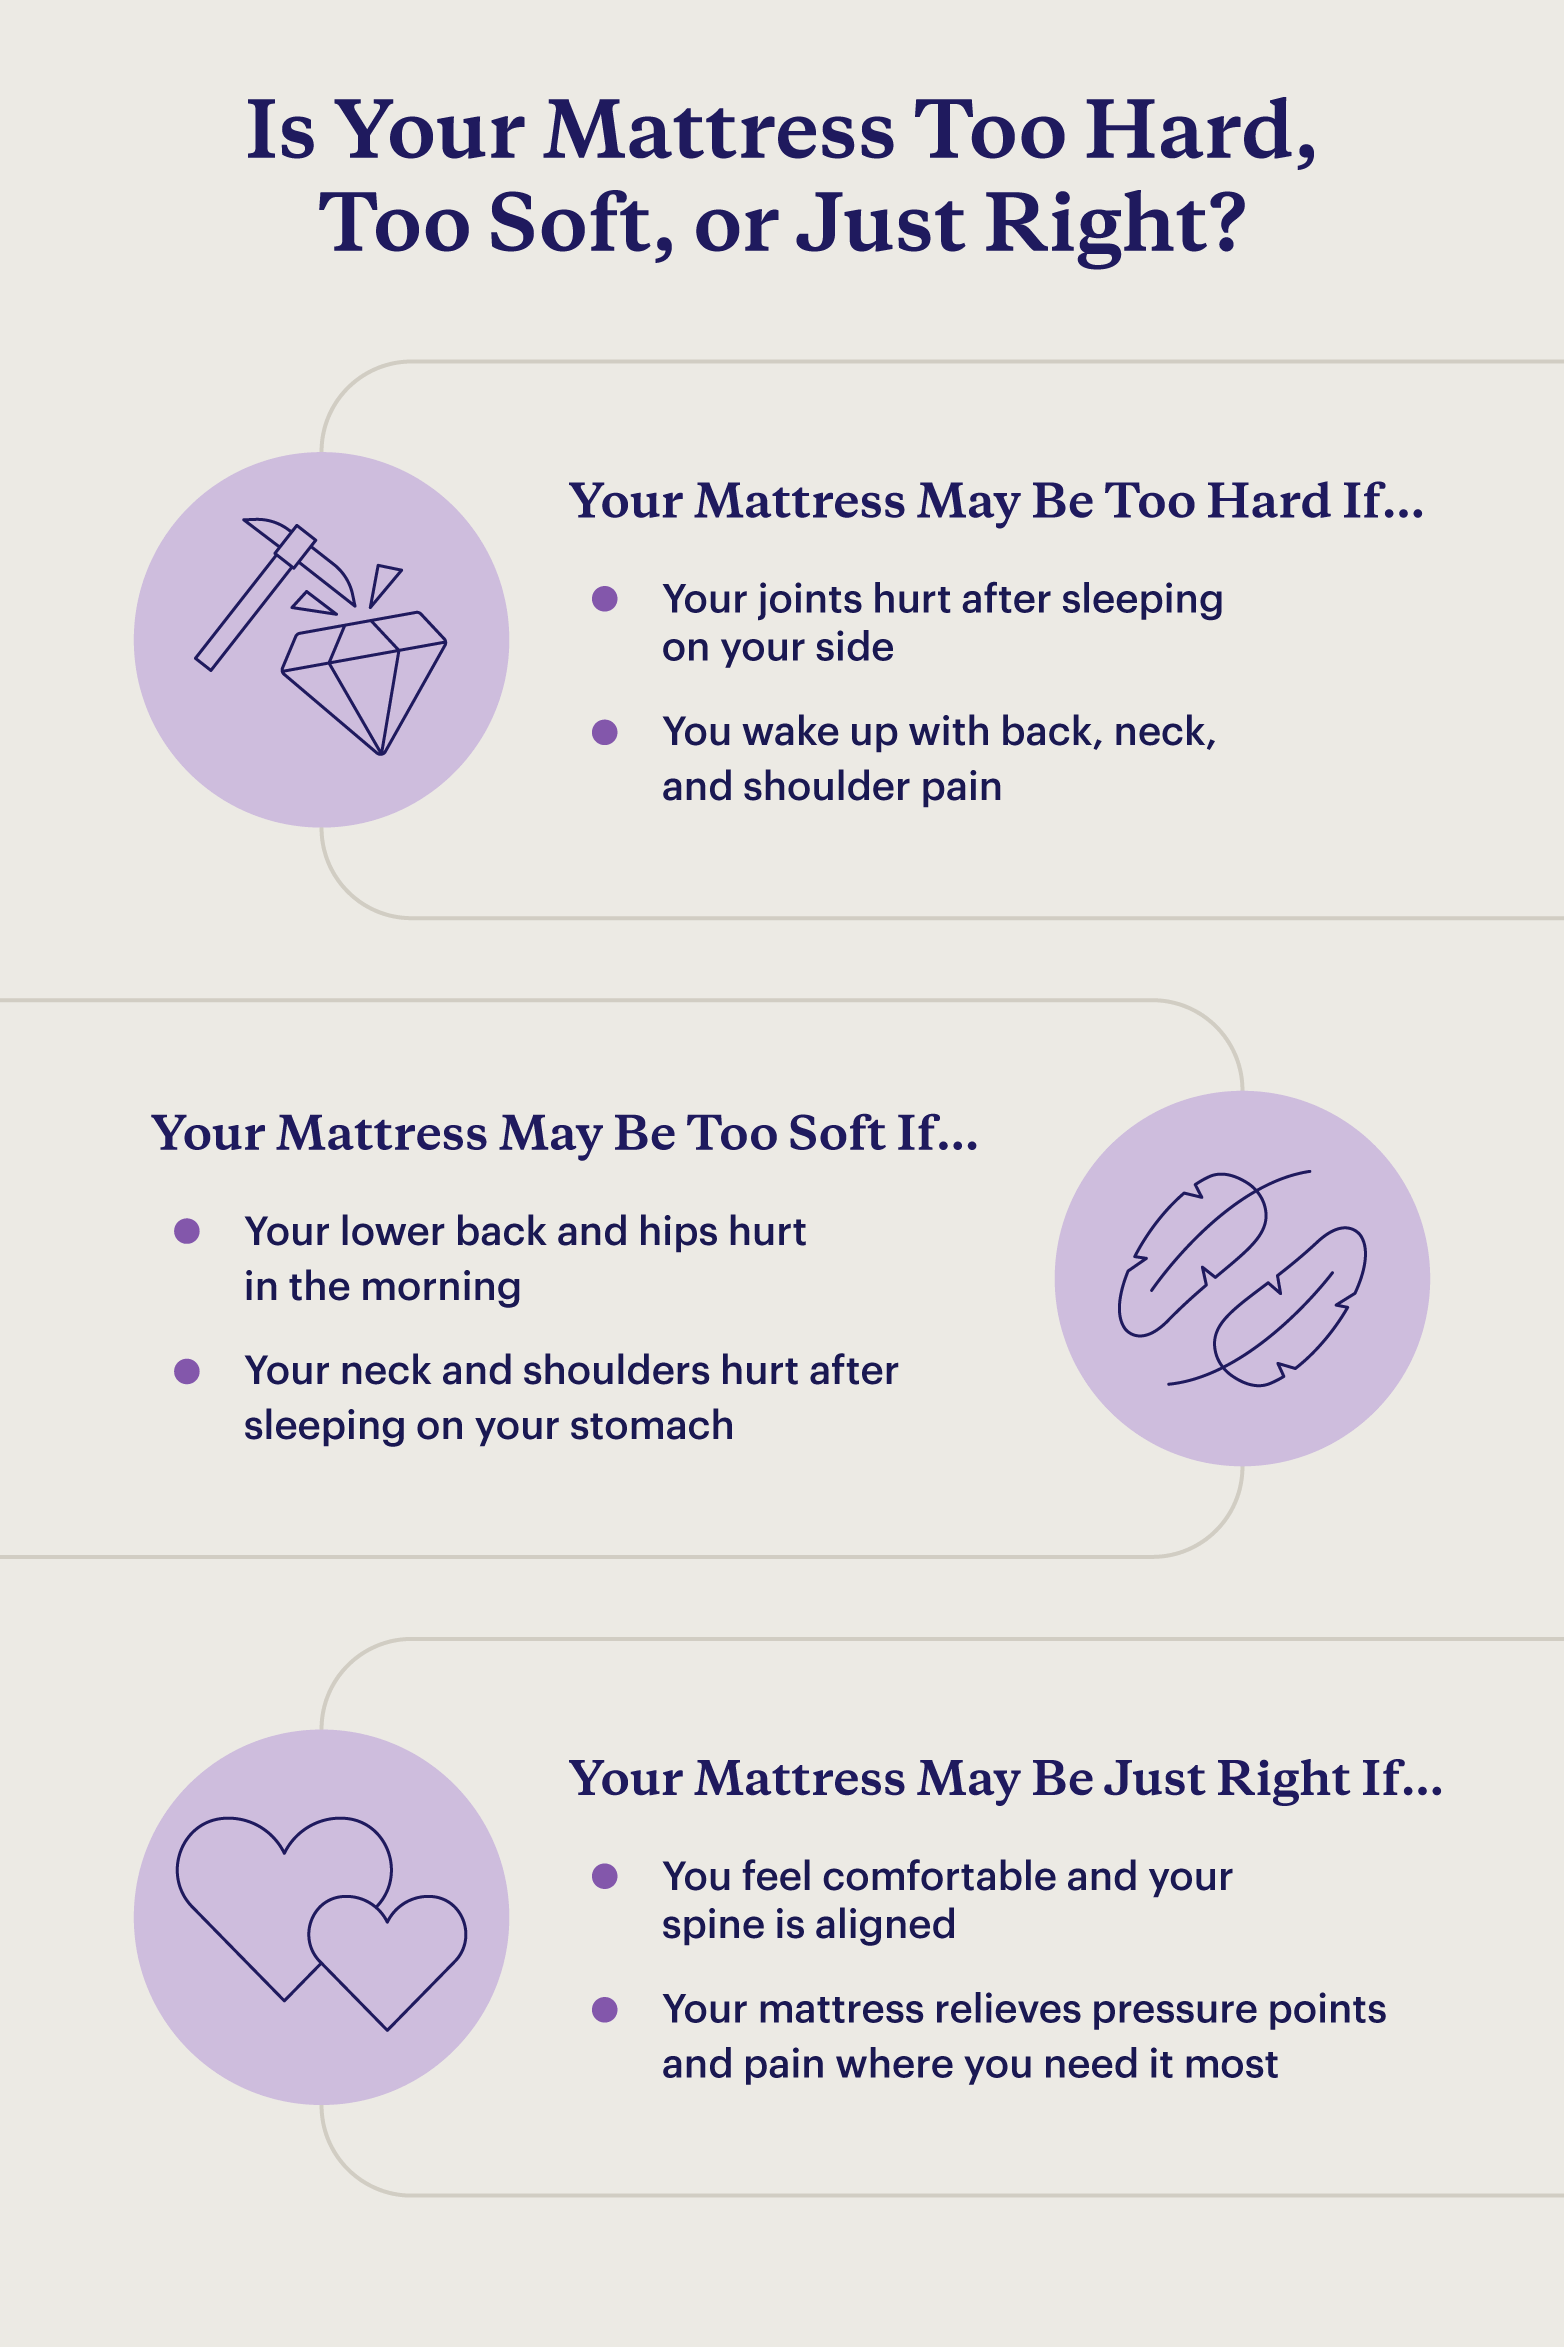 A graphic describing potential signs that your mattress is too hard, too soft, or just right.